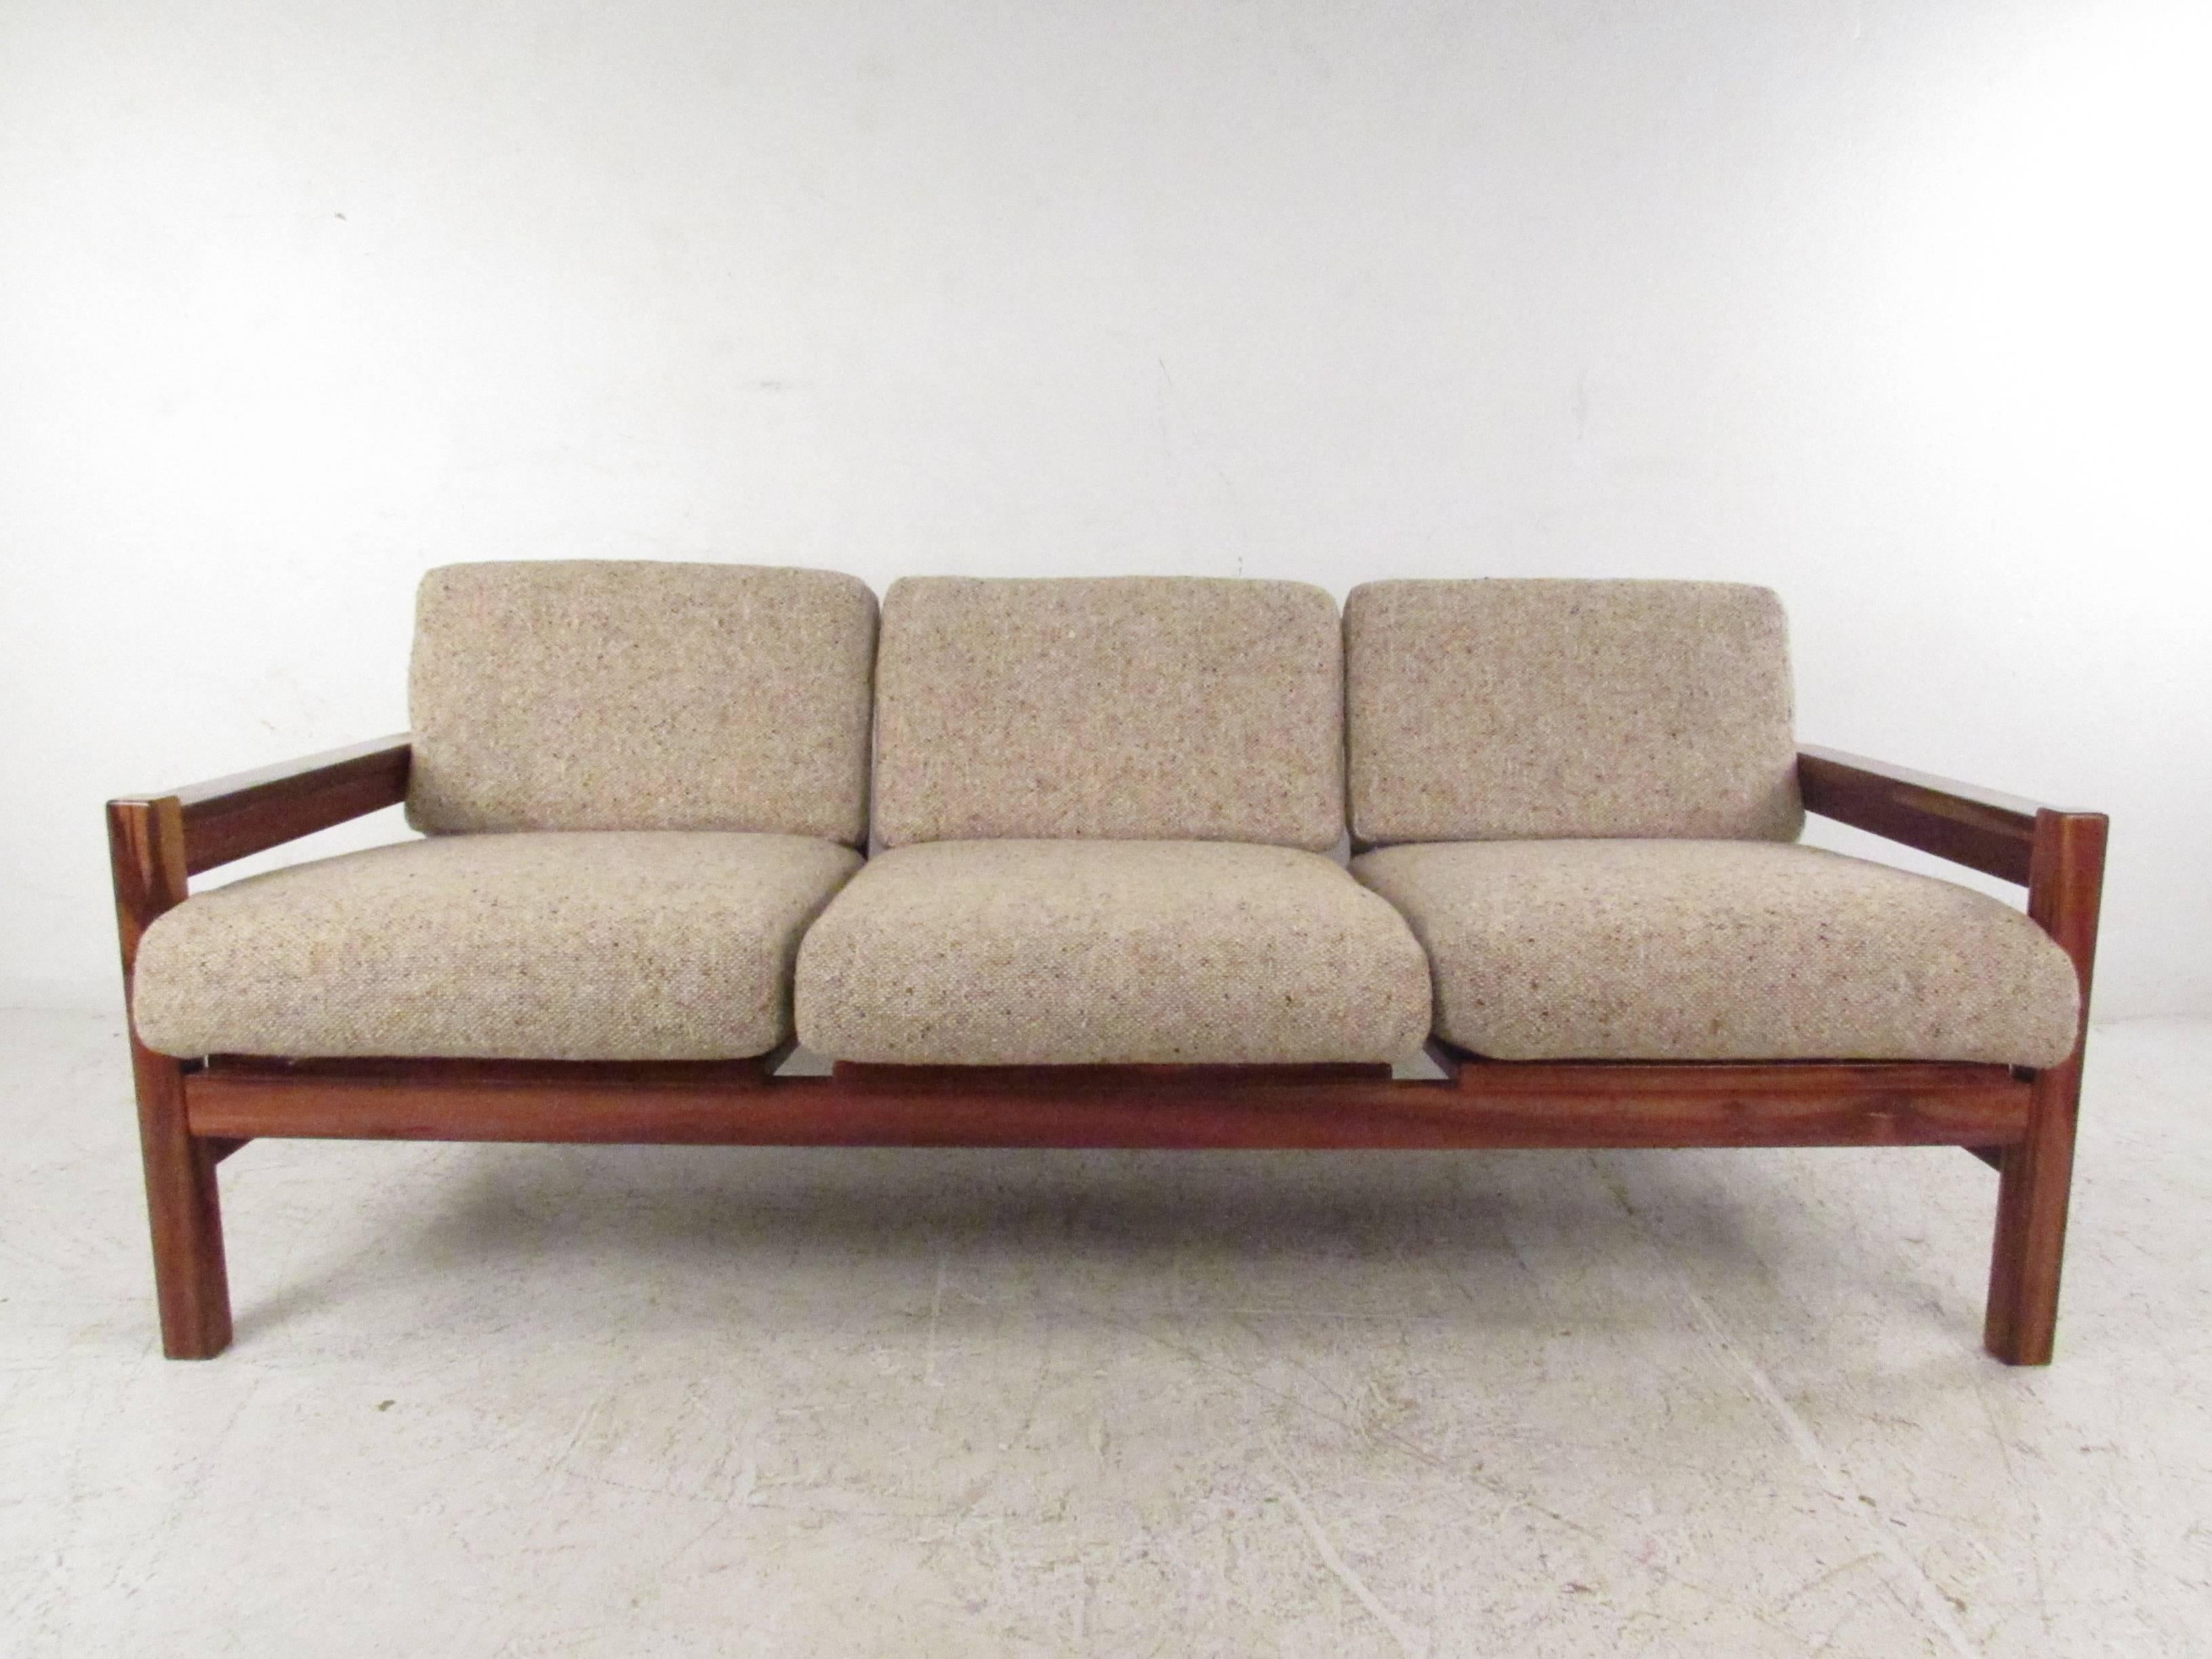 This is unique Israeli sofa features a sturdy rosewood frame, slat back and comfortable strap seating. Vintage rosewood finish, stylish modern design and comfortable upholstery make this sofa a great addition to seating in any room. Please confirm